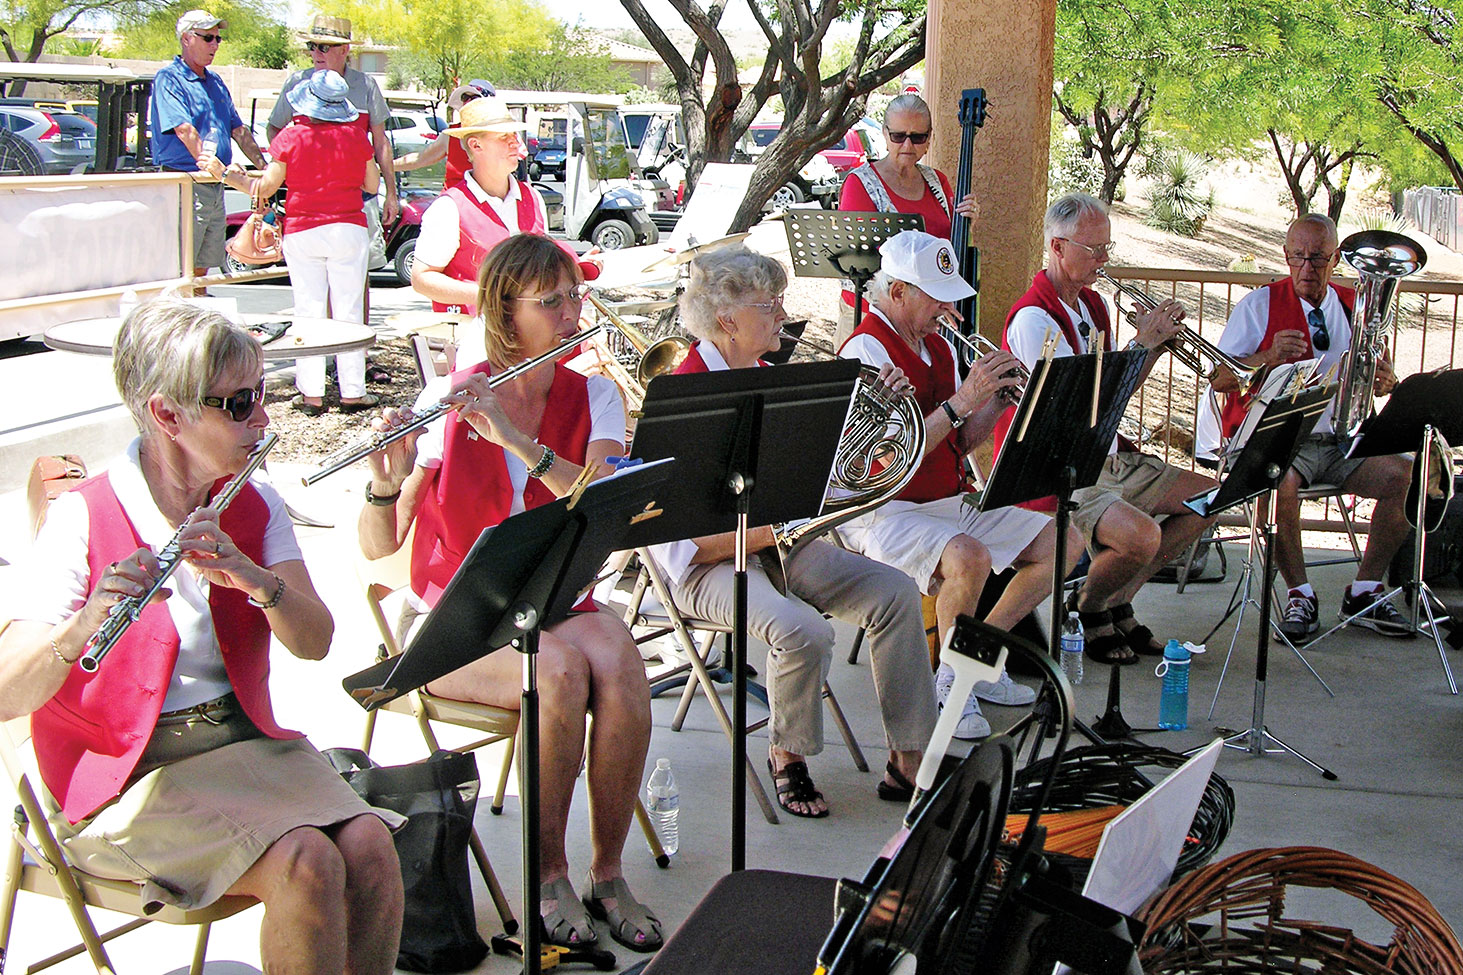 Members of SaddleBrooke Wind and Strings entertained the crowd between games; photo by Pat Tiefenbach.